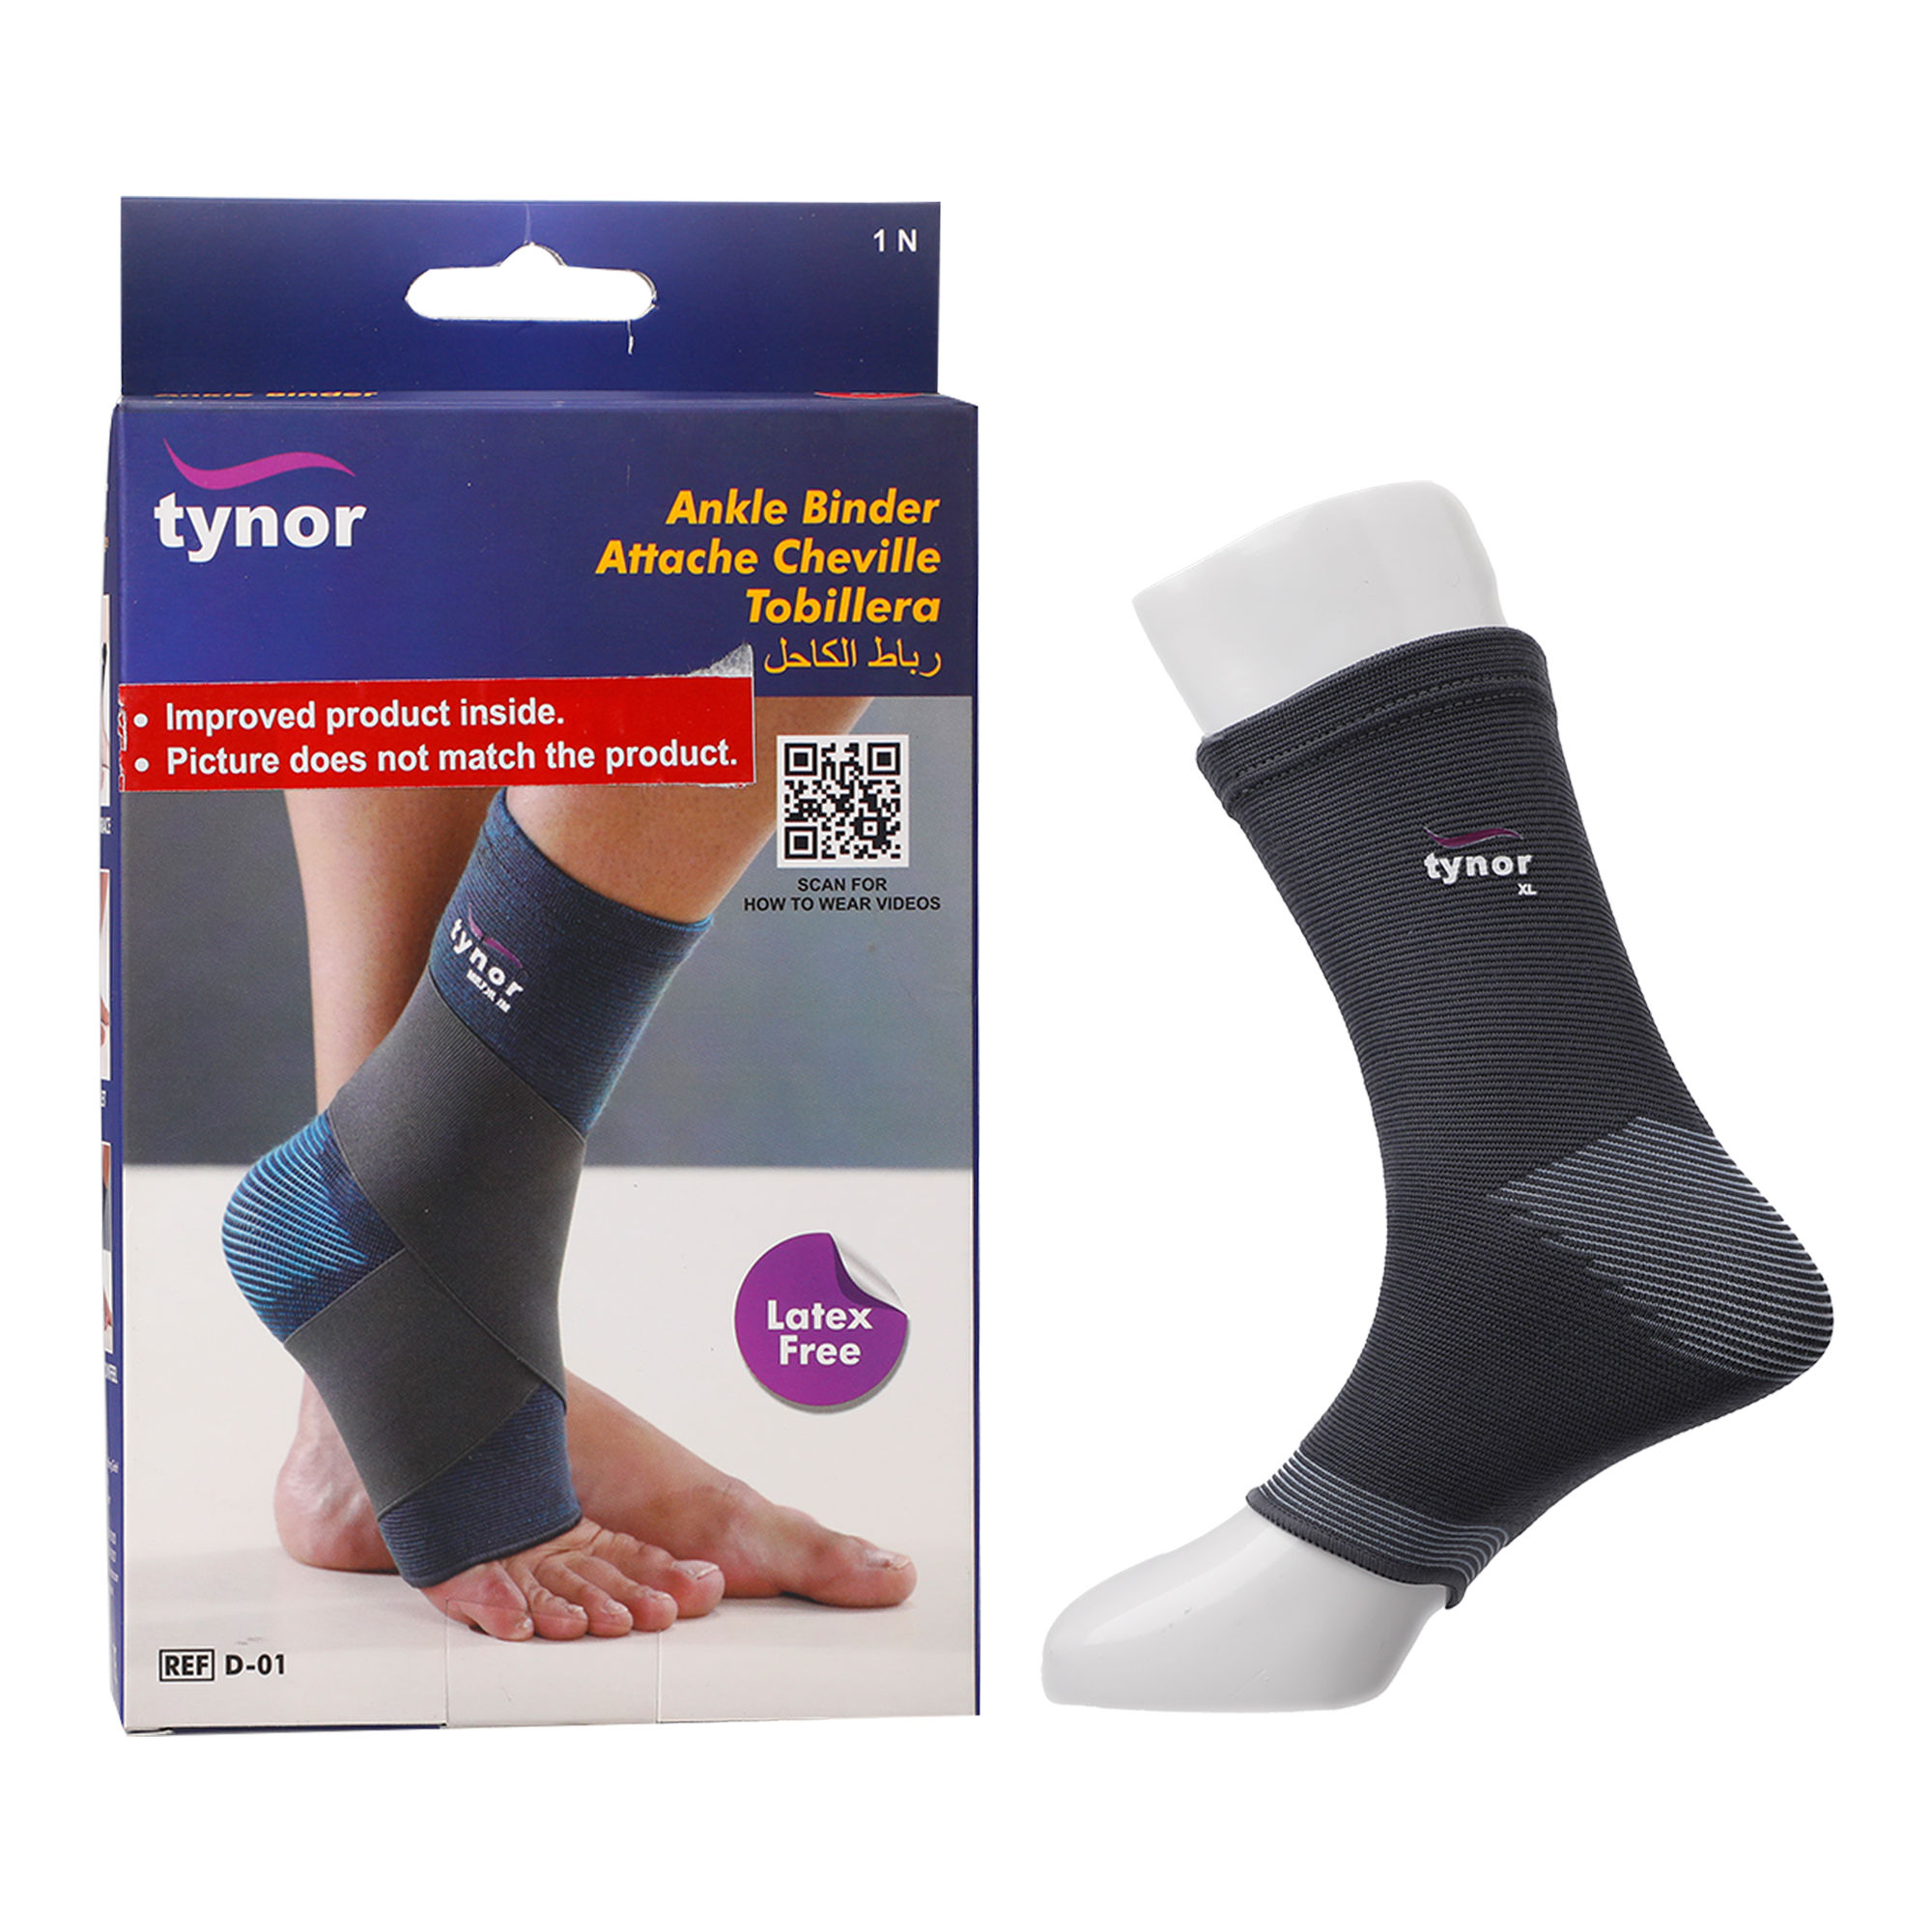 Tynor Anklet Comfeel XL, 1 Count Price, Uses, Side Effects, Composition ...